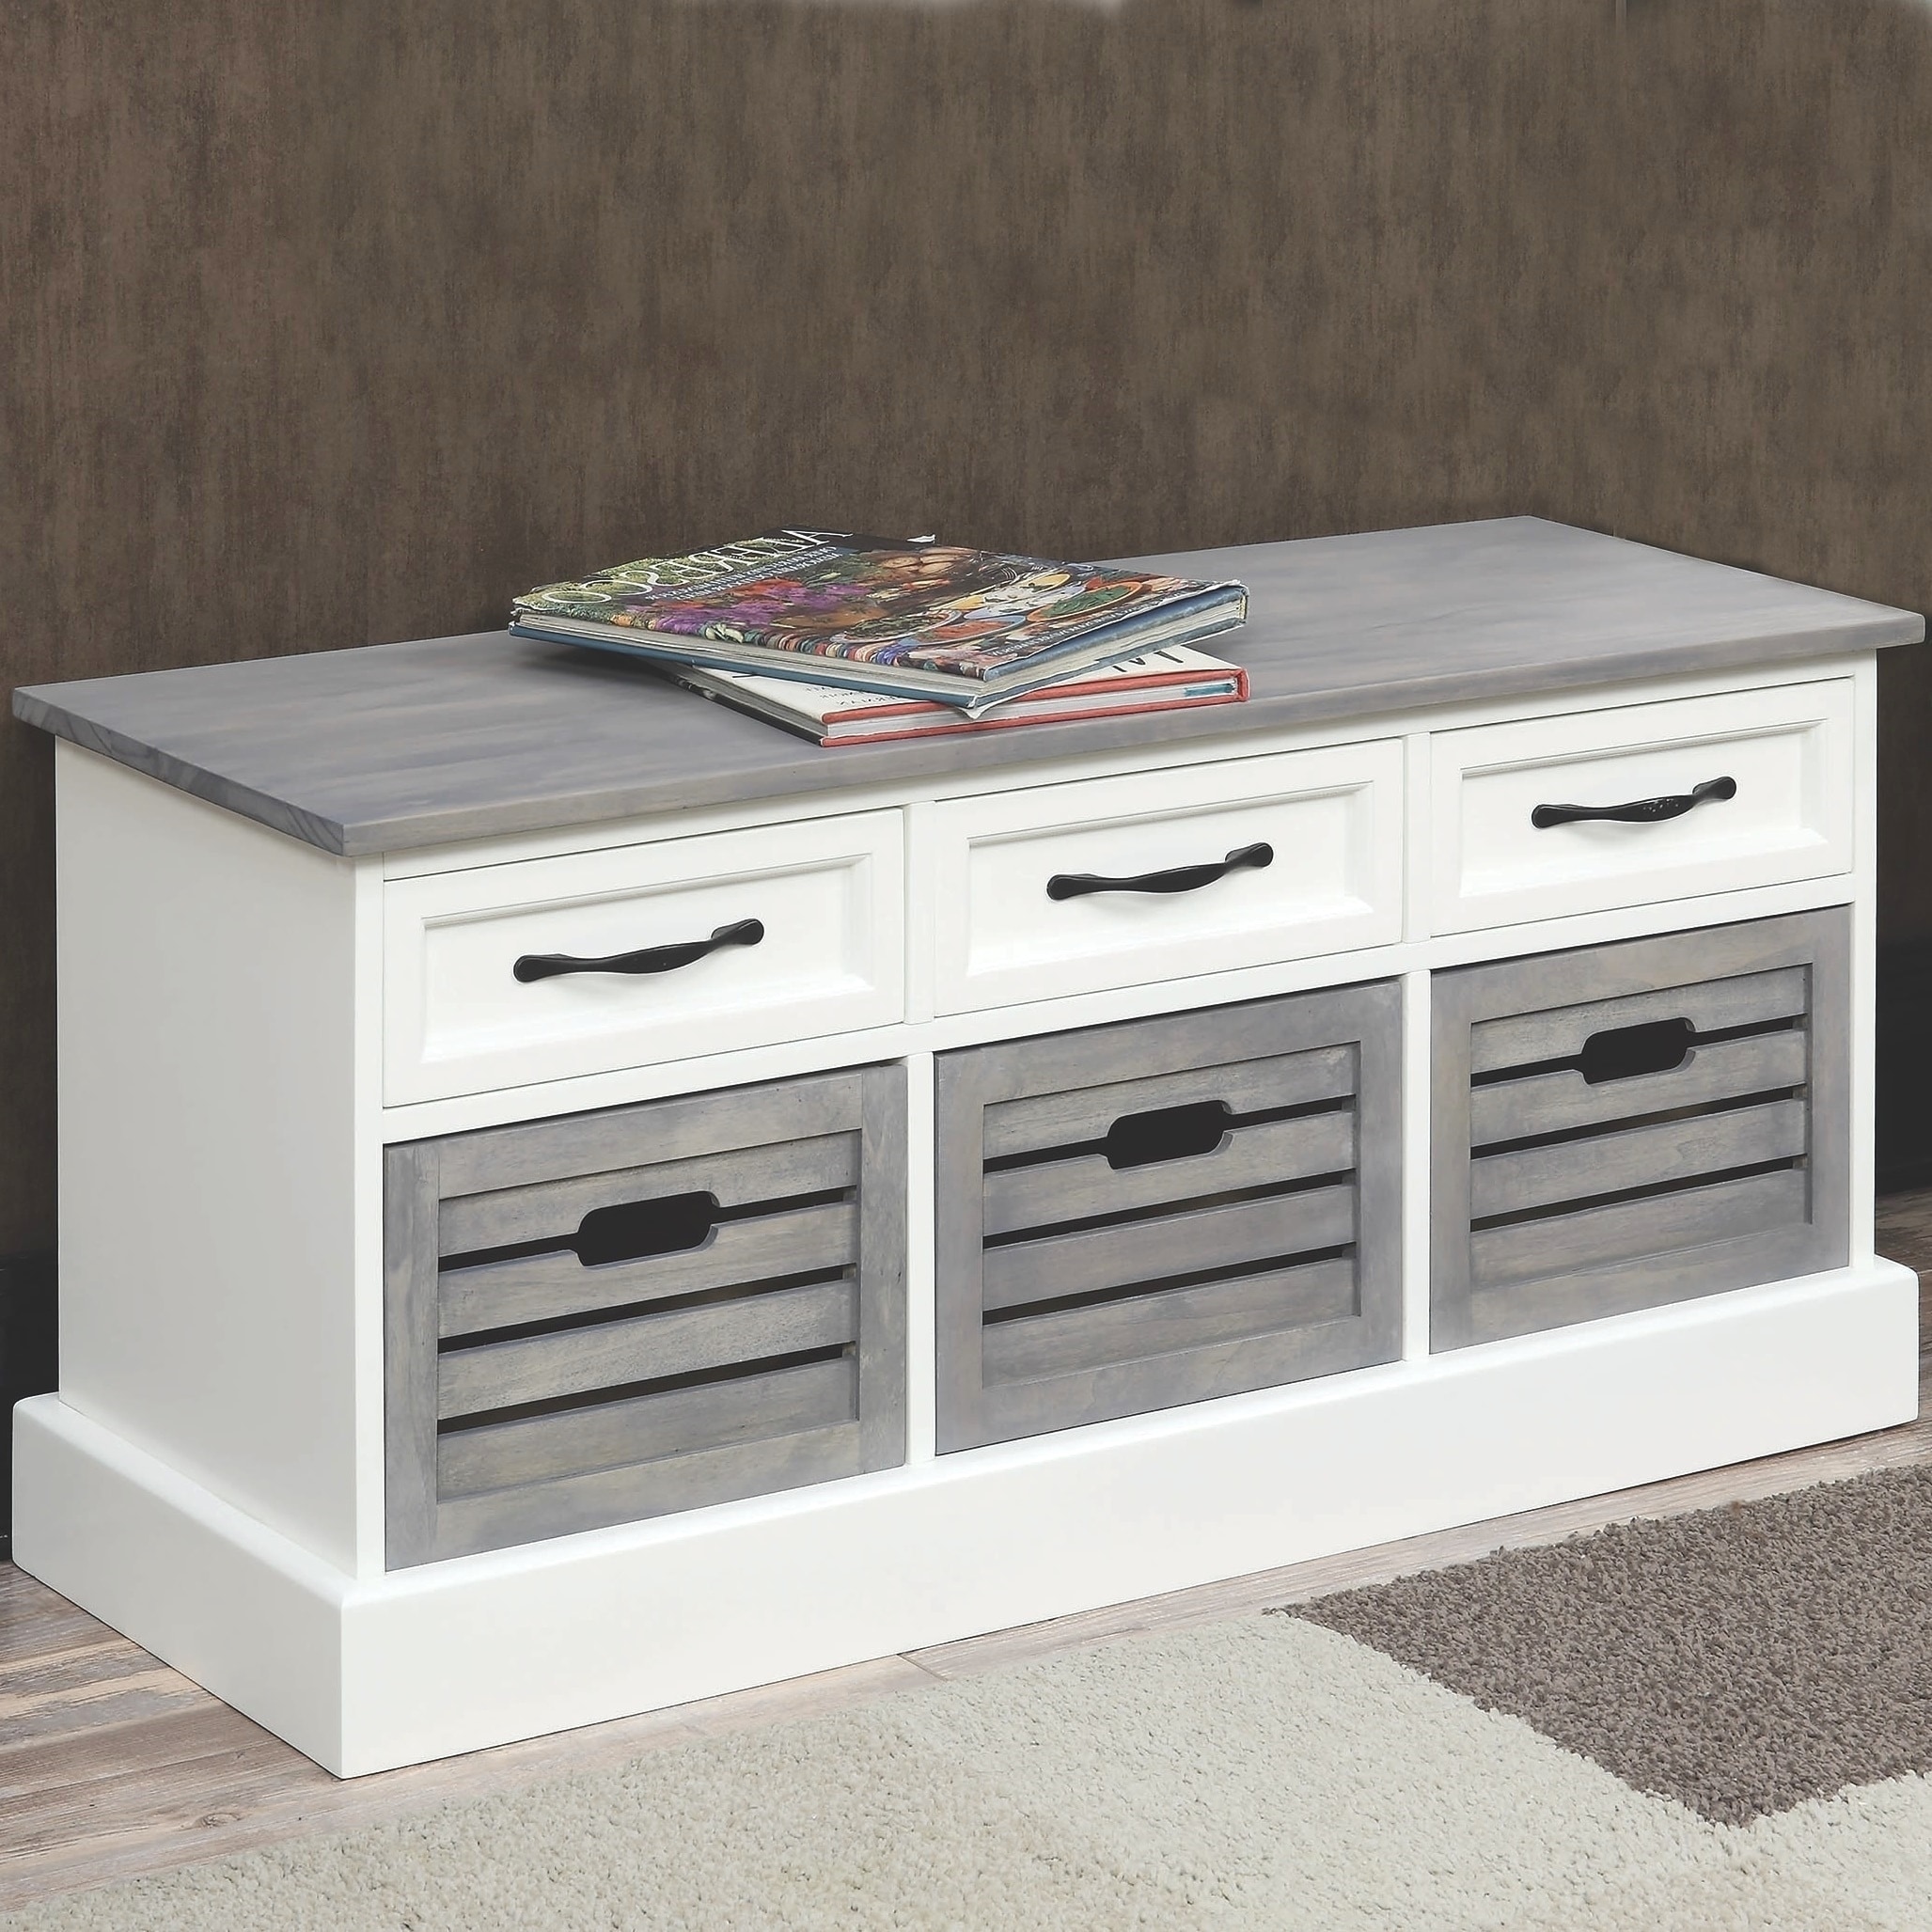 Two Toned Grey White Storage Bench With Drawers And Wooden Baskets Overstock 29473584